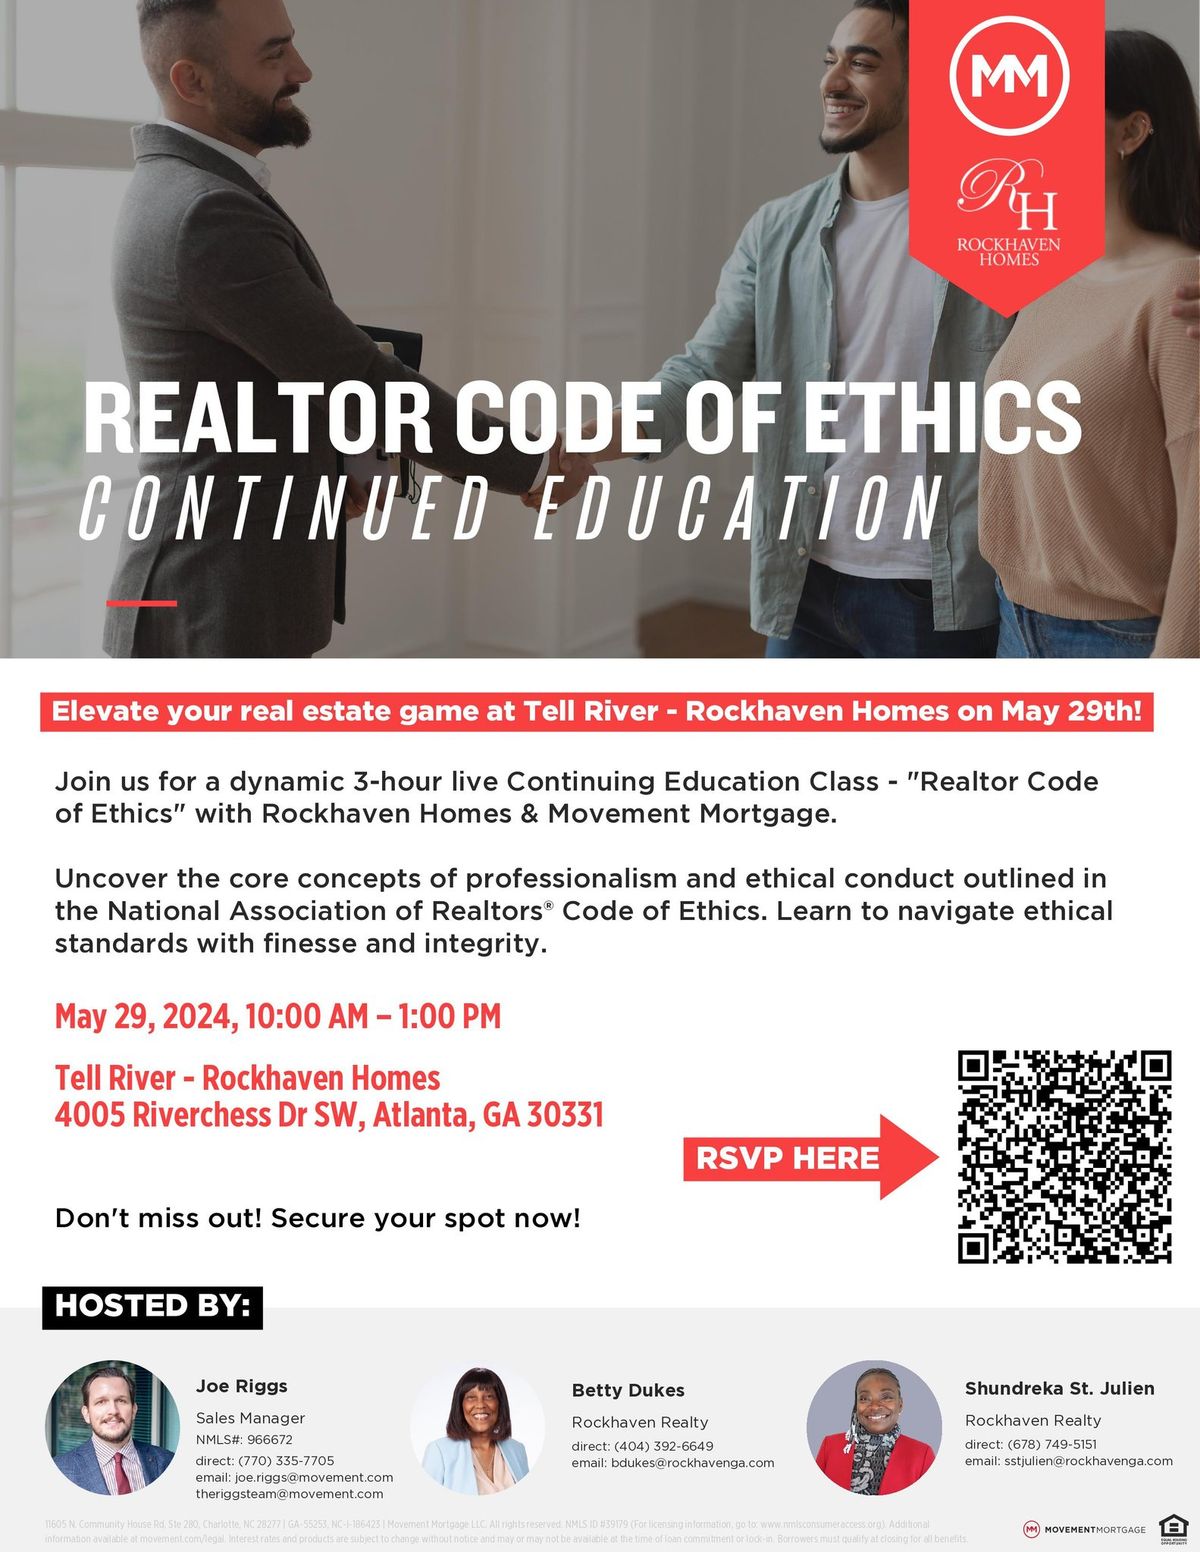 Realtor Code of Ethics CE Class - Tell River